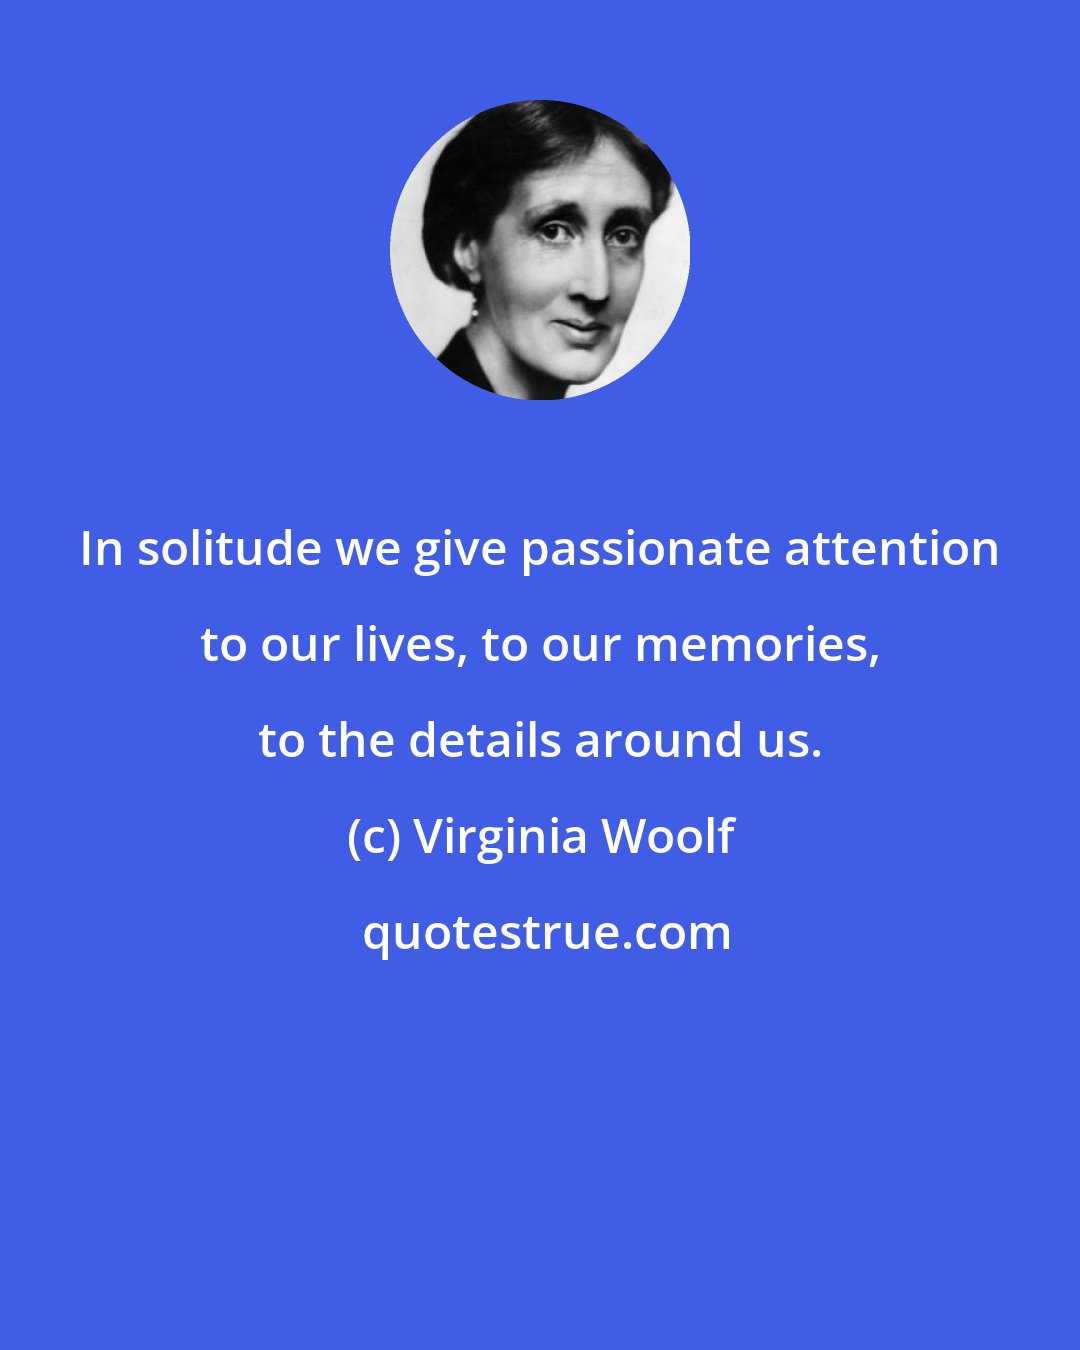 Virginia Woolf: In solitude we give passionate attention to our lives, to our memories, to the details around us.